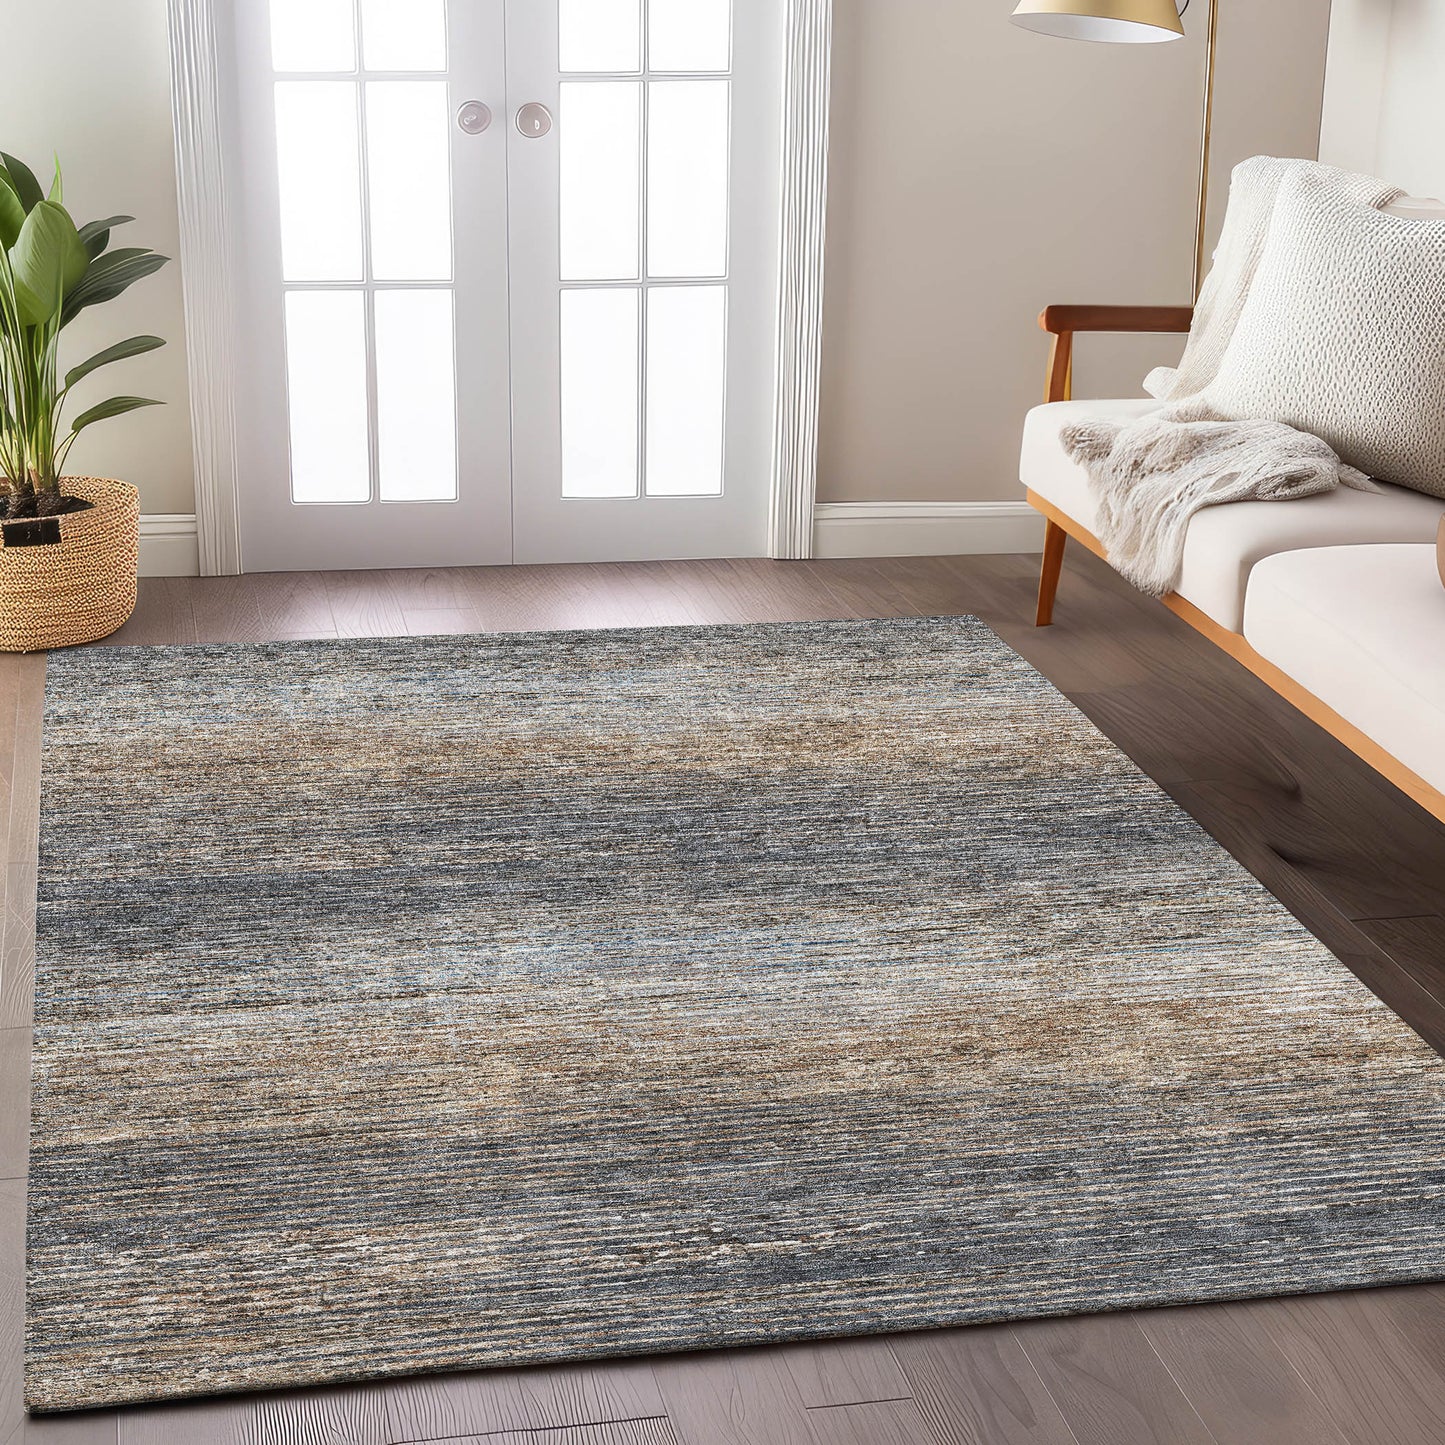 Dalyn Rugs Trevi TV1 Pewter  Transitional  Rug